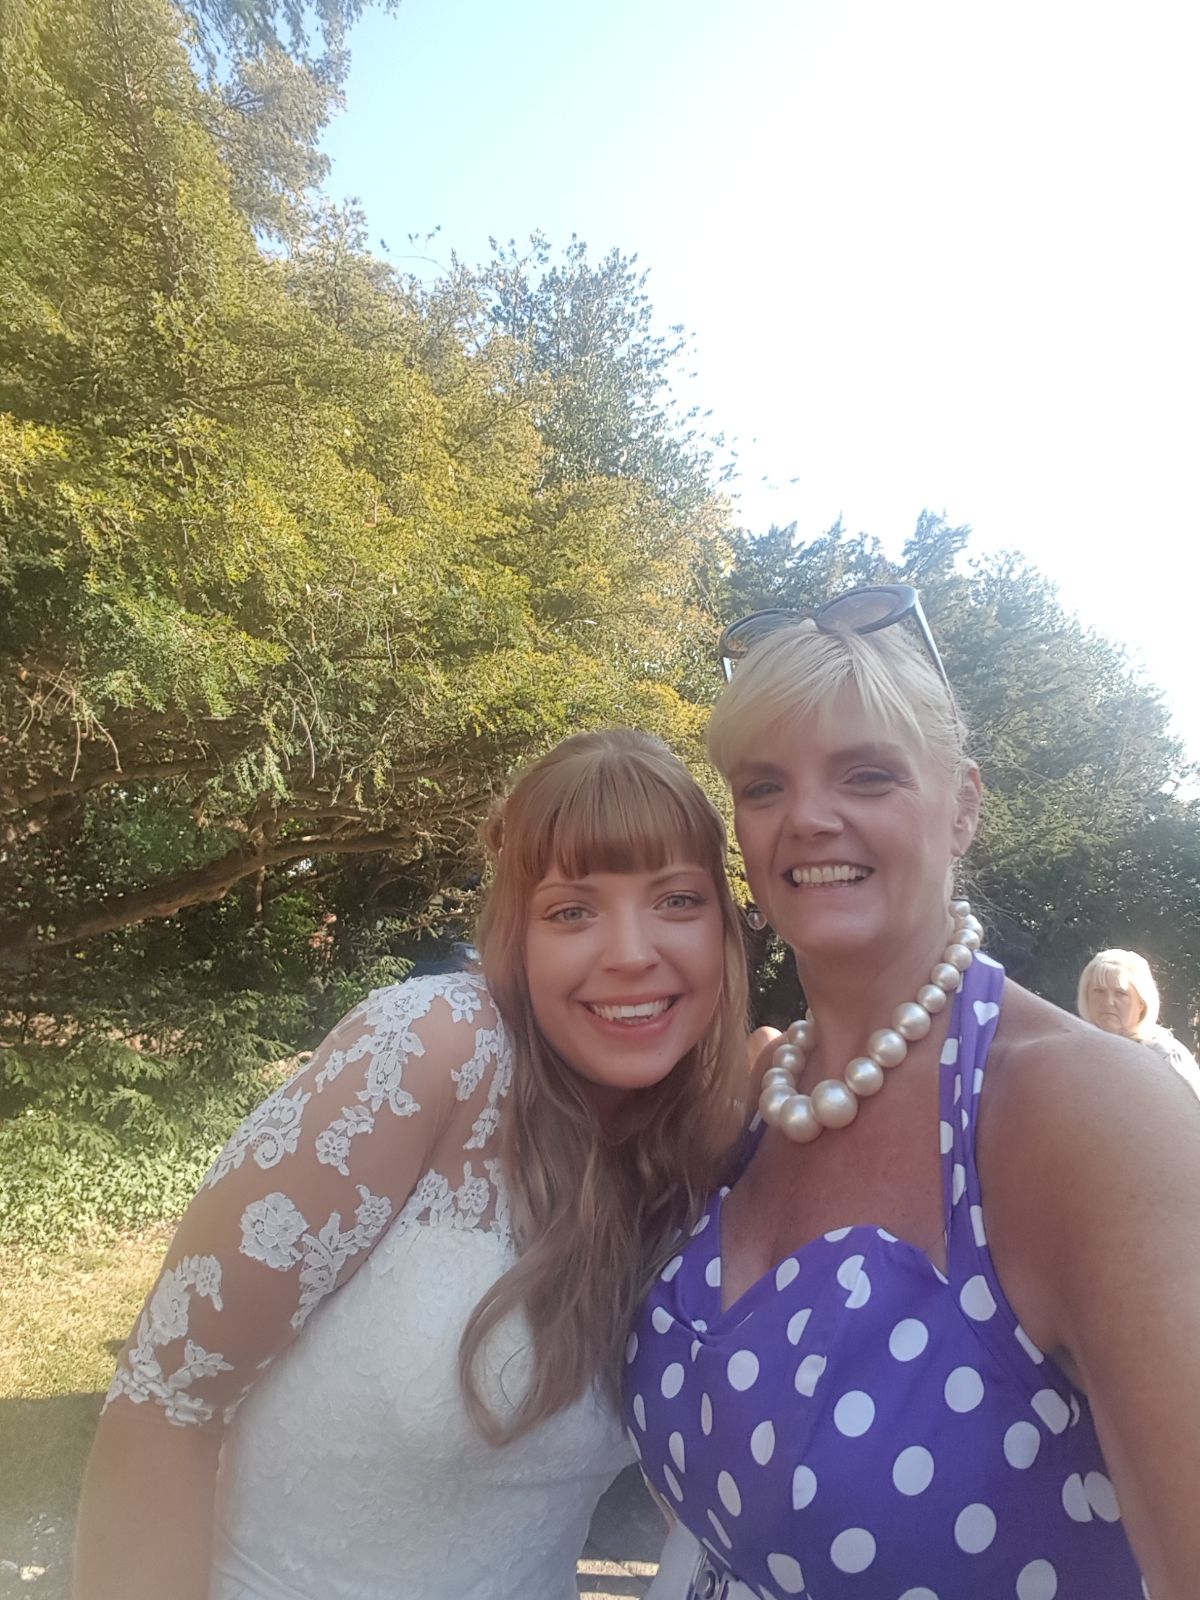 Myself and the lovely bride